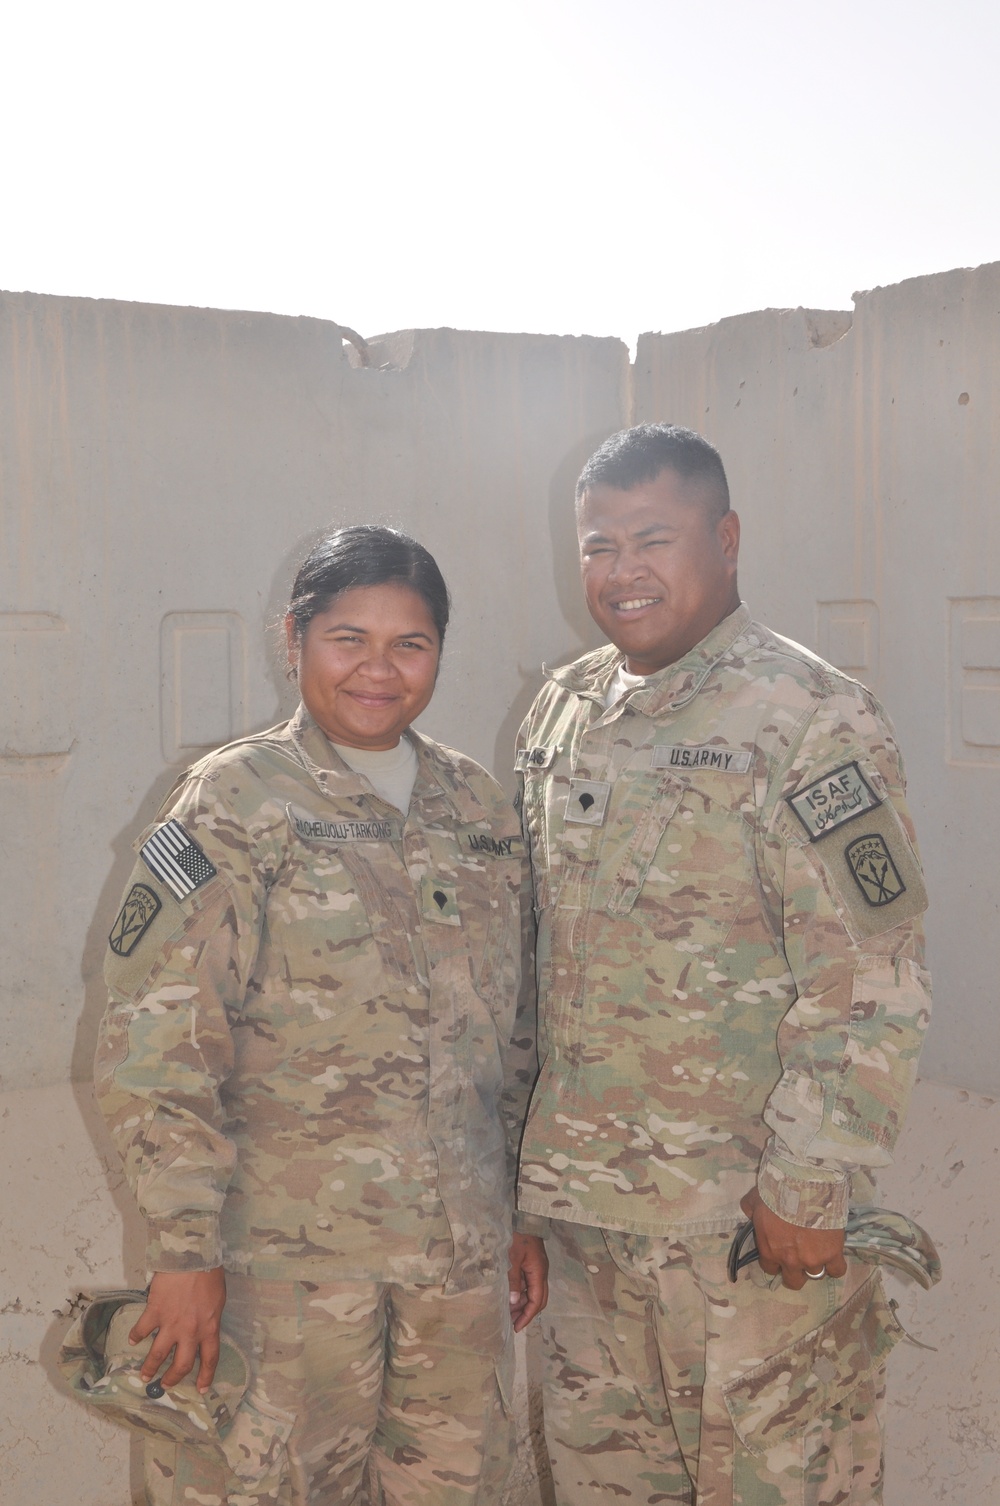 Soldier-siblings become US citizens in combat zone